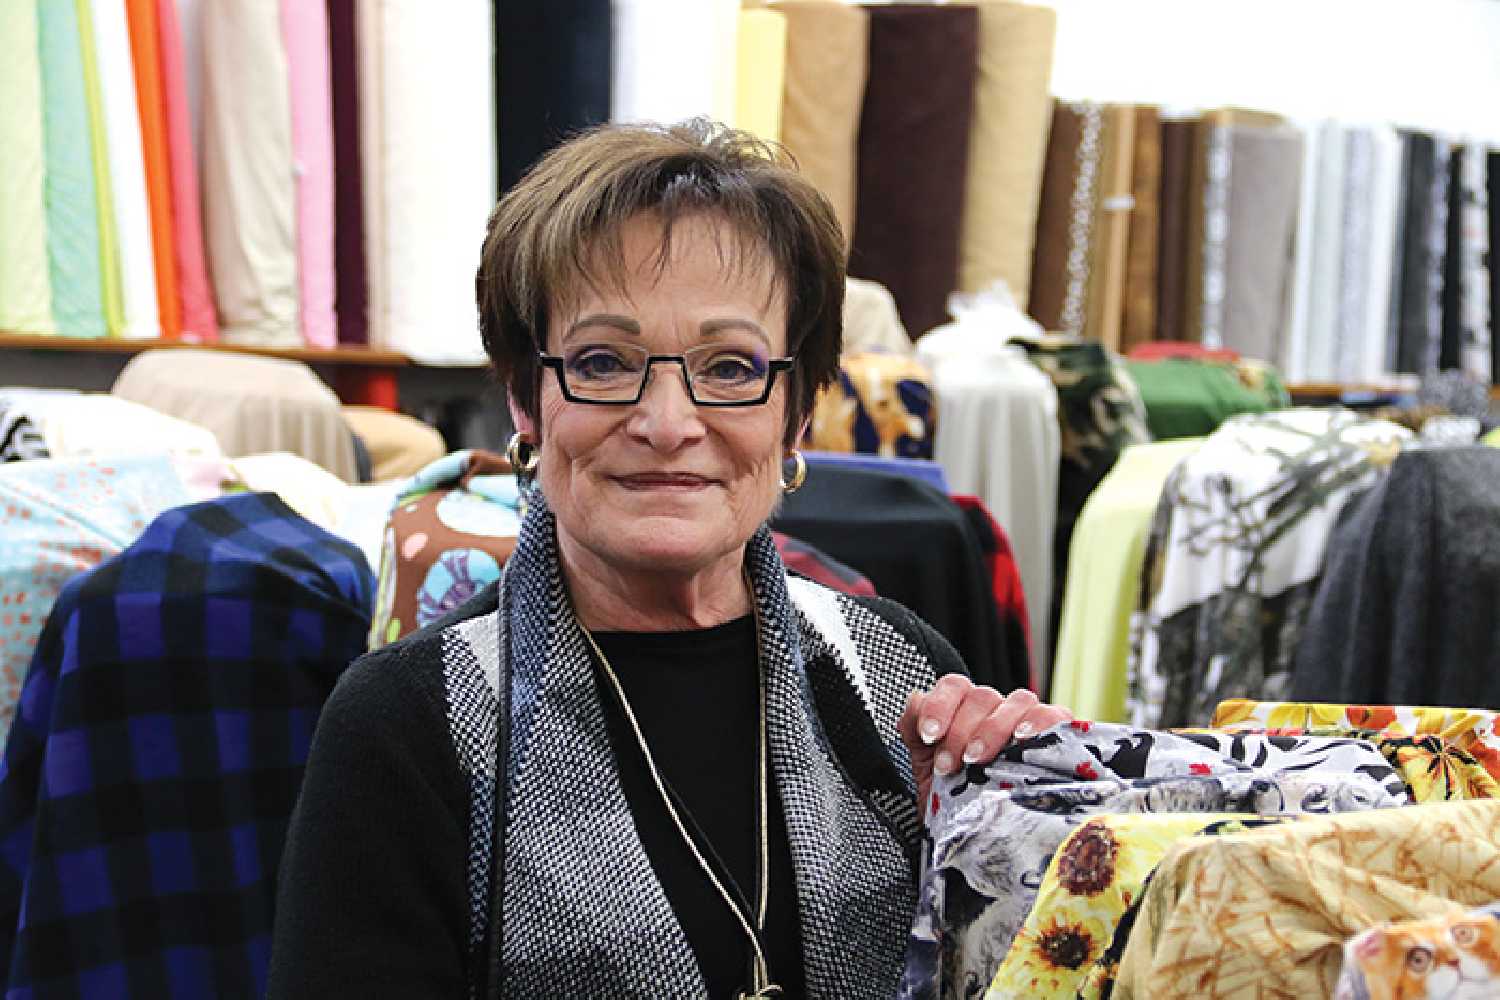 Heather Truman, the owner of Sew Creative in Moosomin.